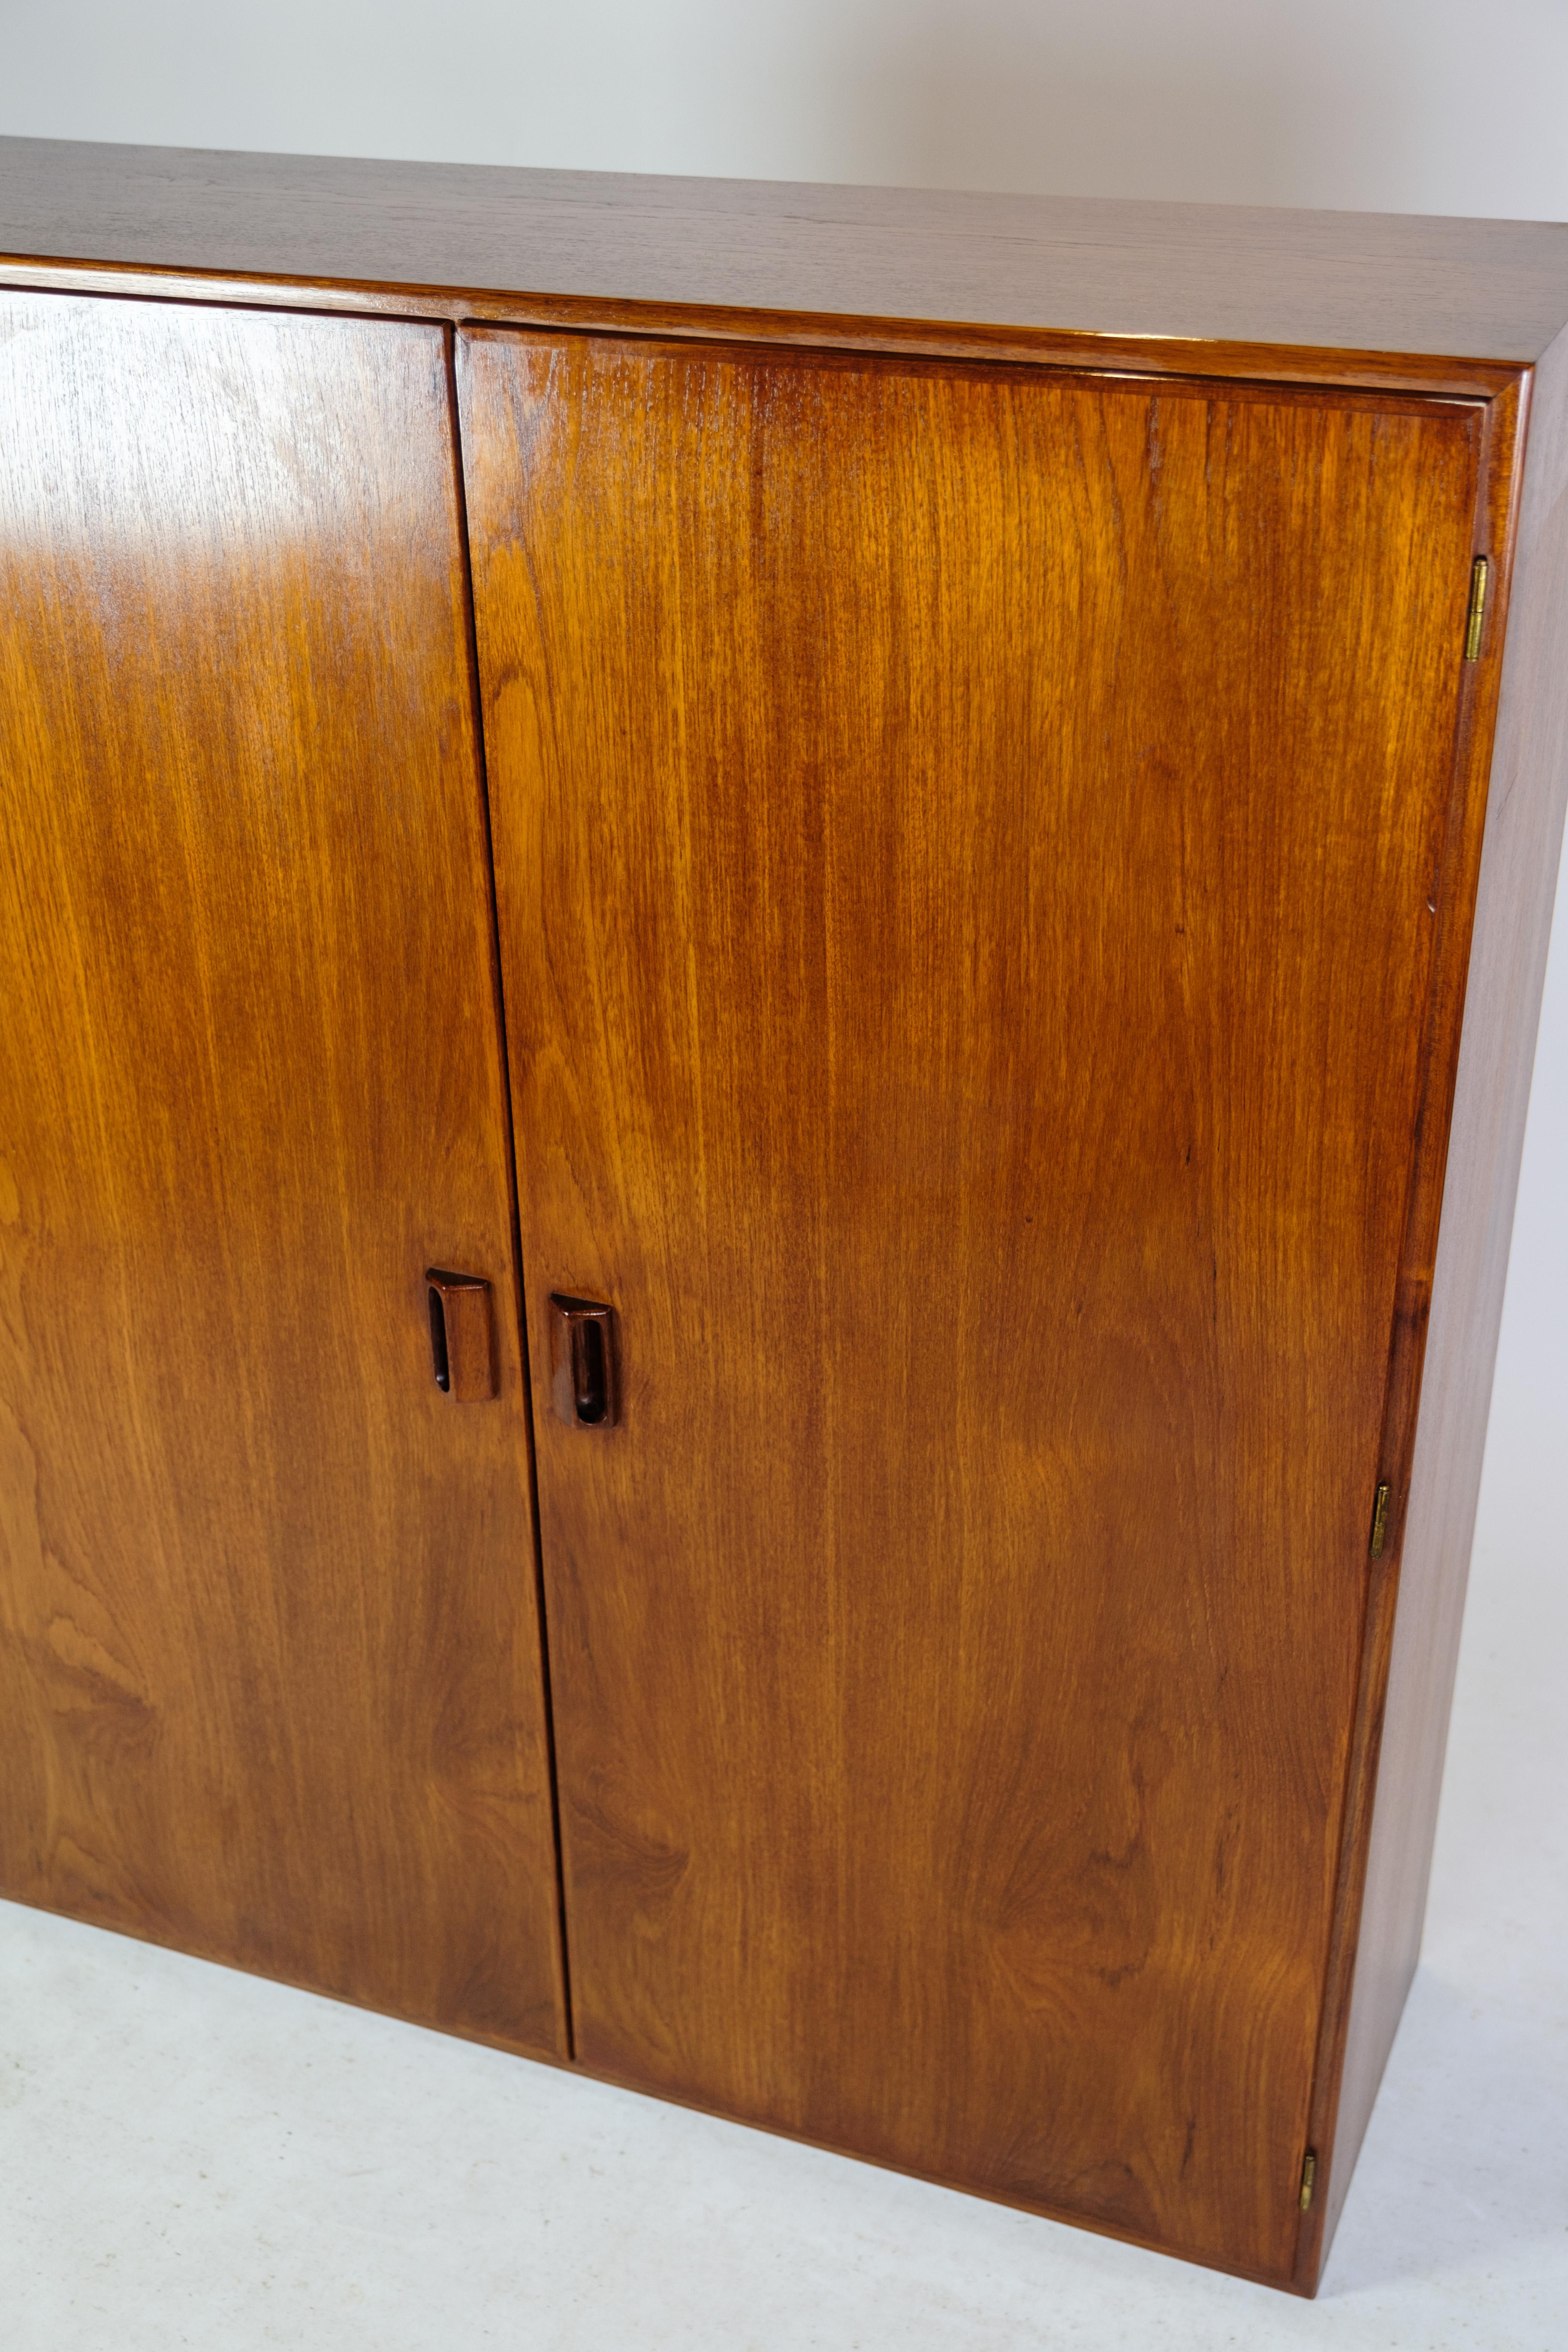 Mid-20th Century Børge Mogensen Hanging Cabinet In Teak Wood from the 1950s For Sale